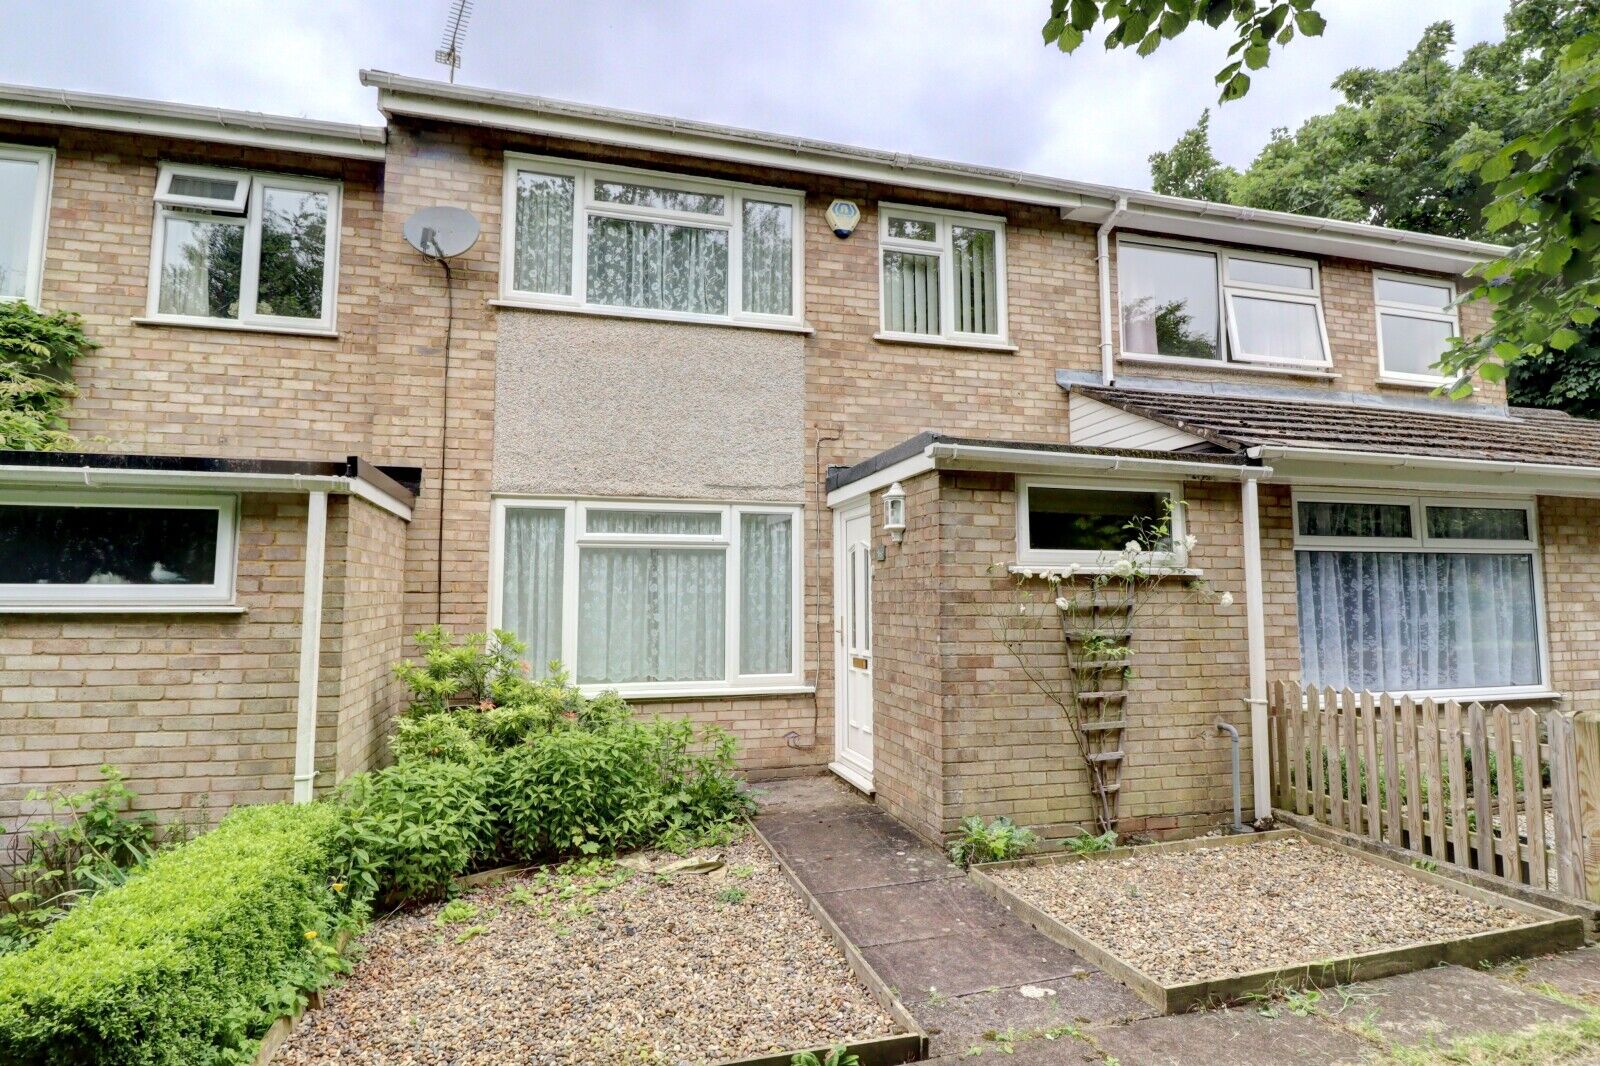 3 bedroom mid terraced house for sale Heather Walk, Hazlemere, HP15, main image